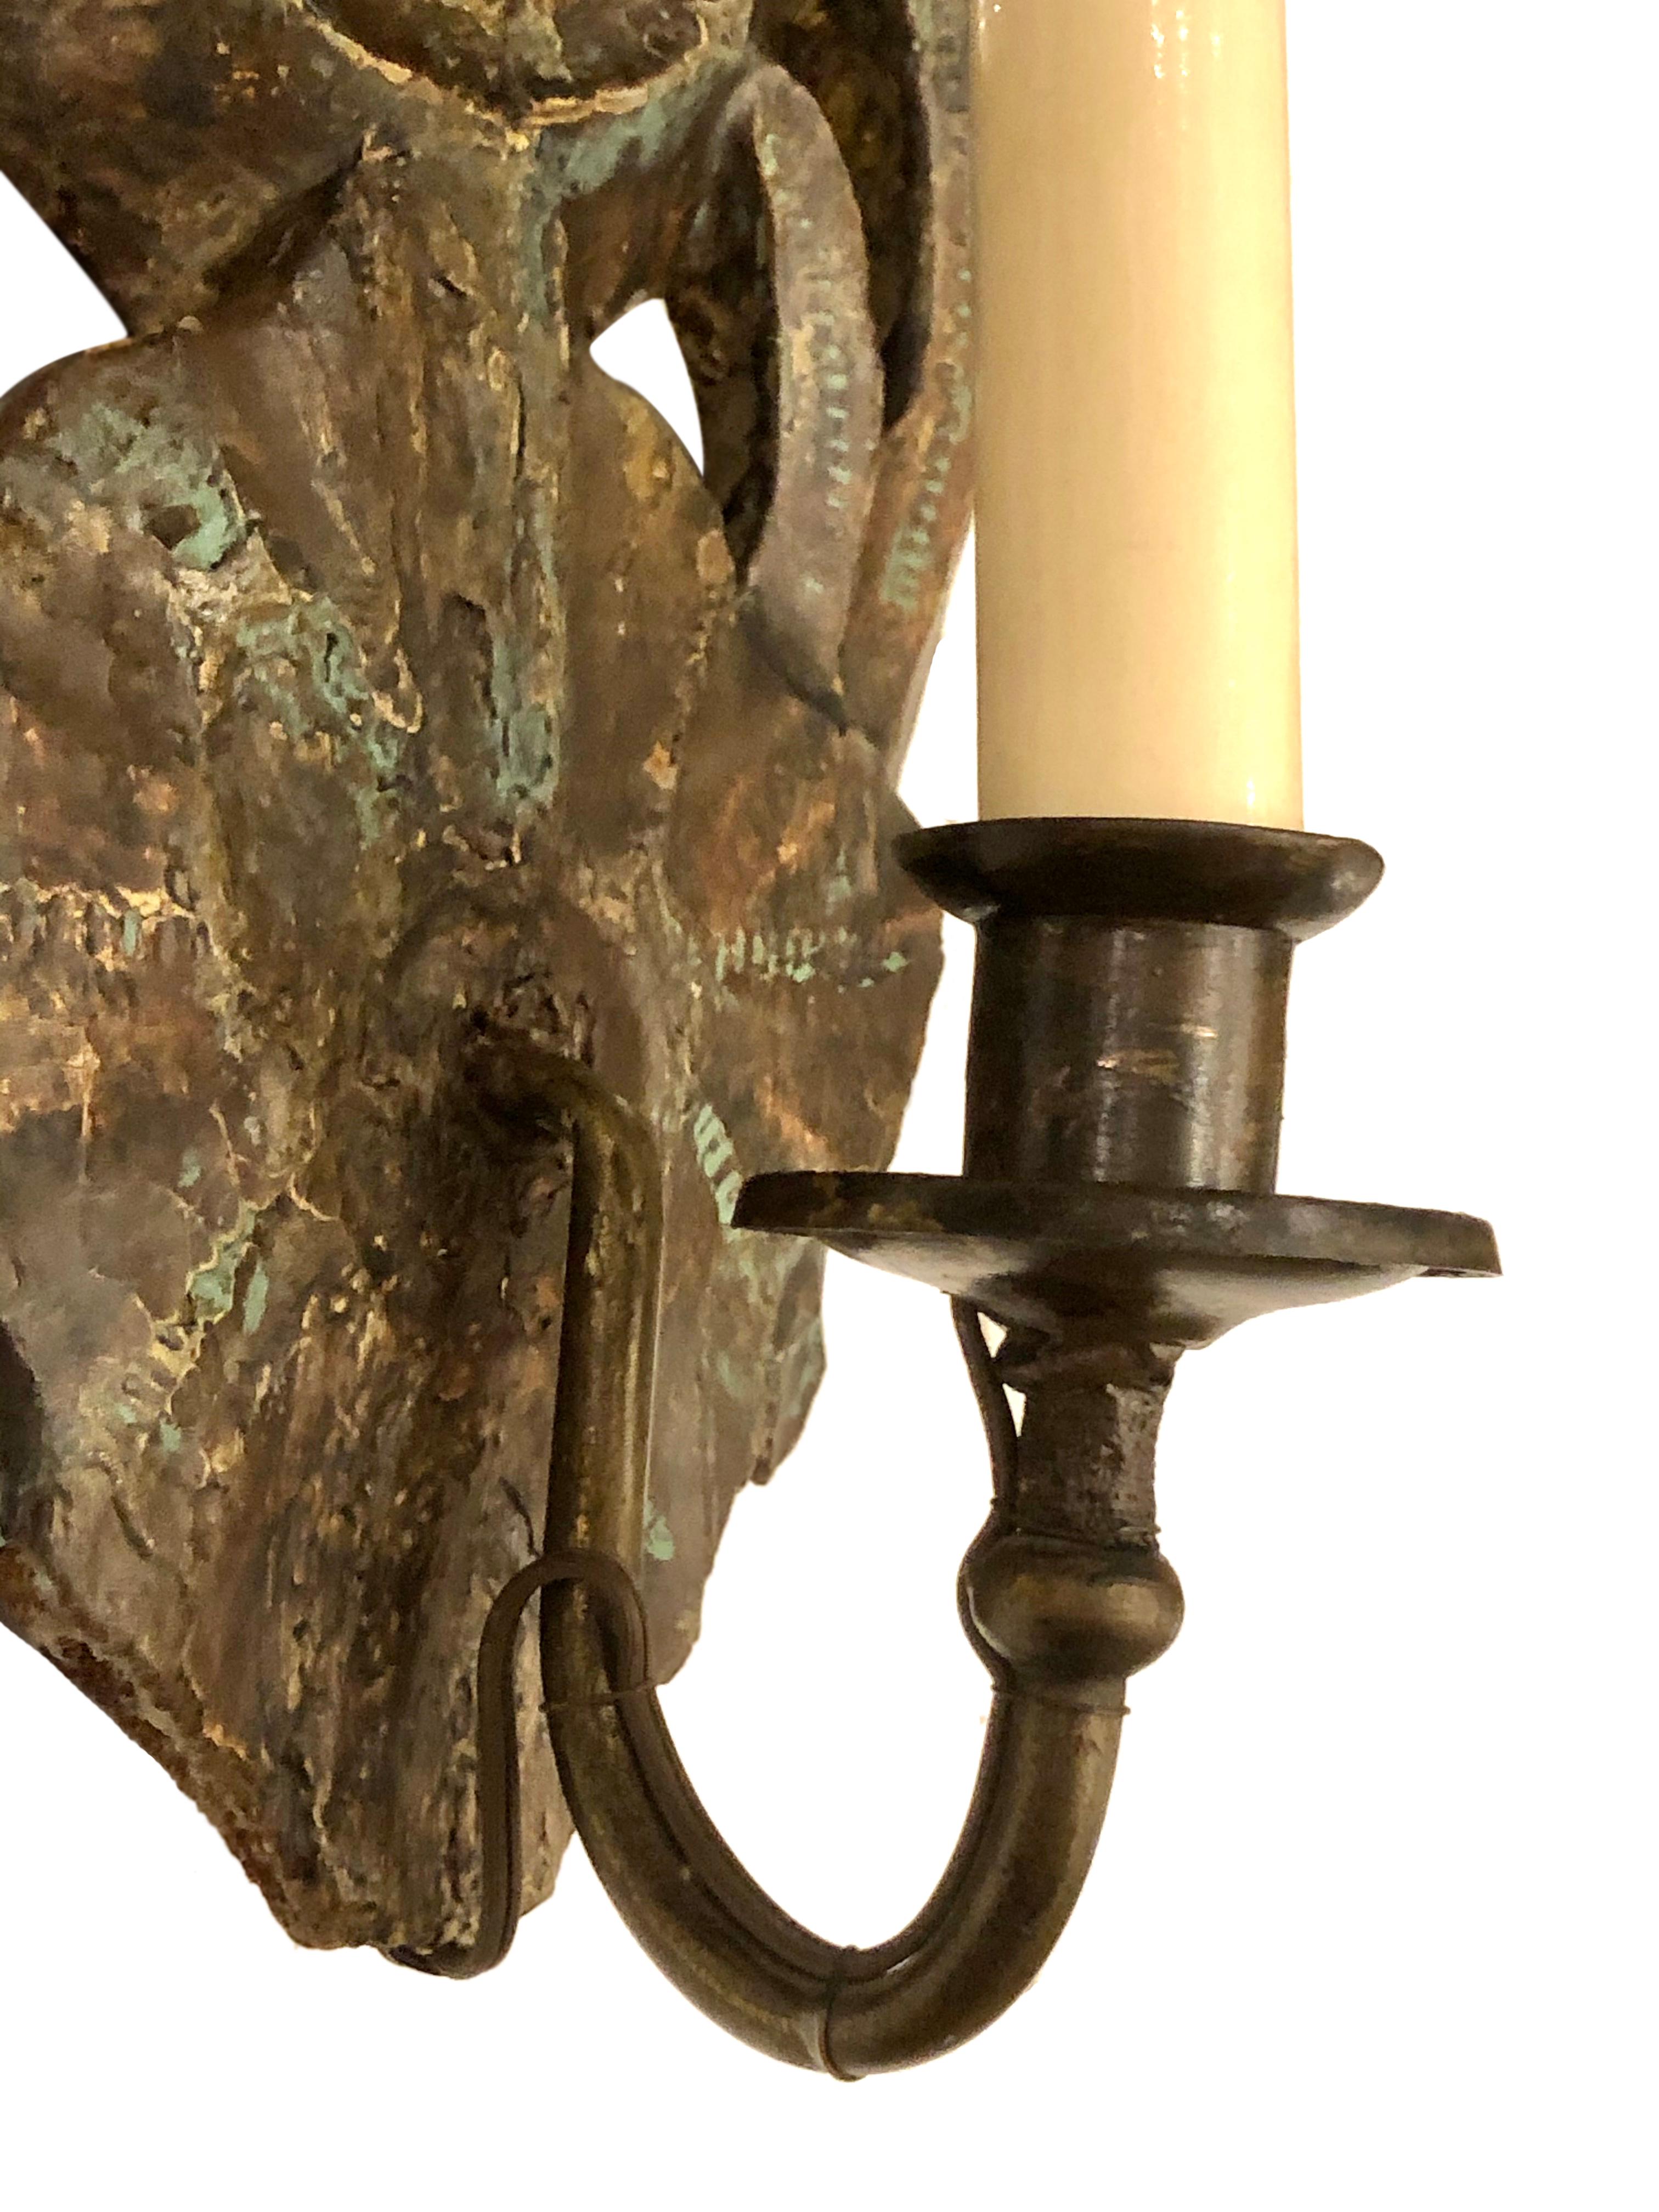 19th Century Venetian Wood Grotto Sconces with Mirror Back